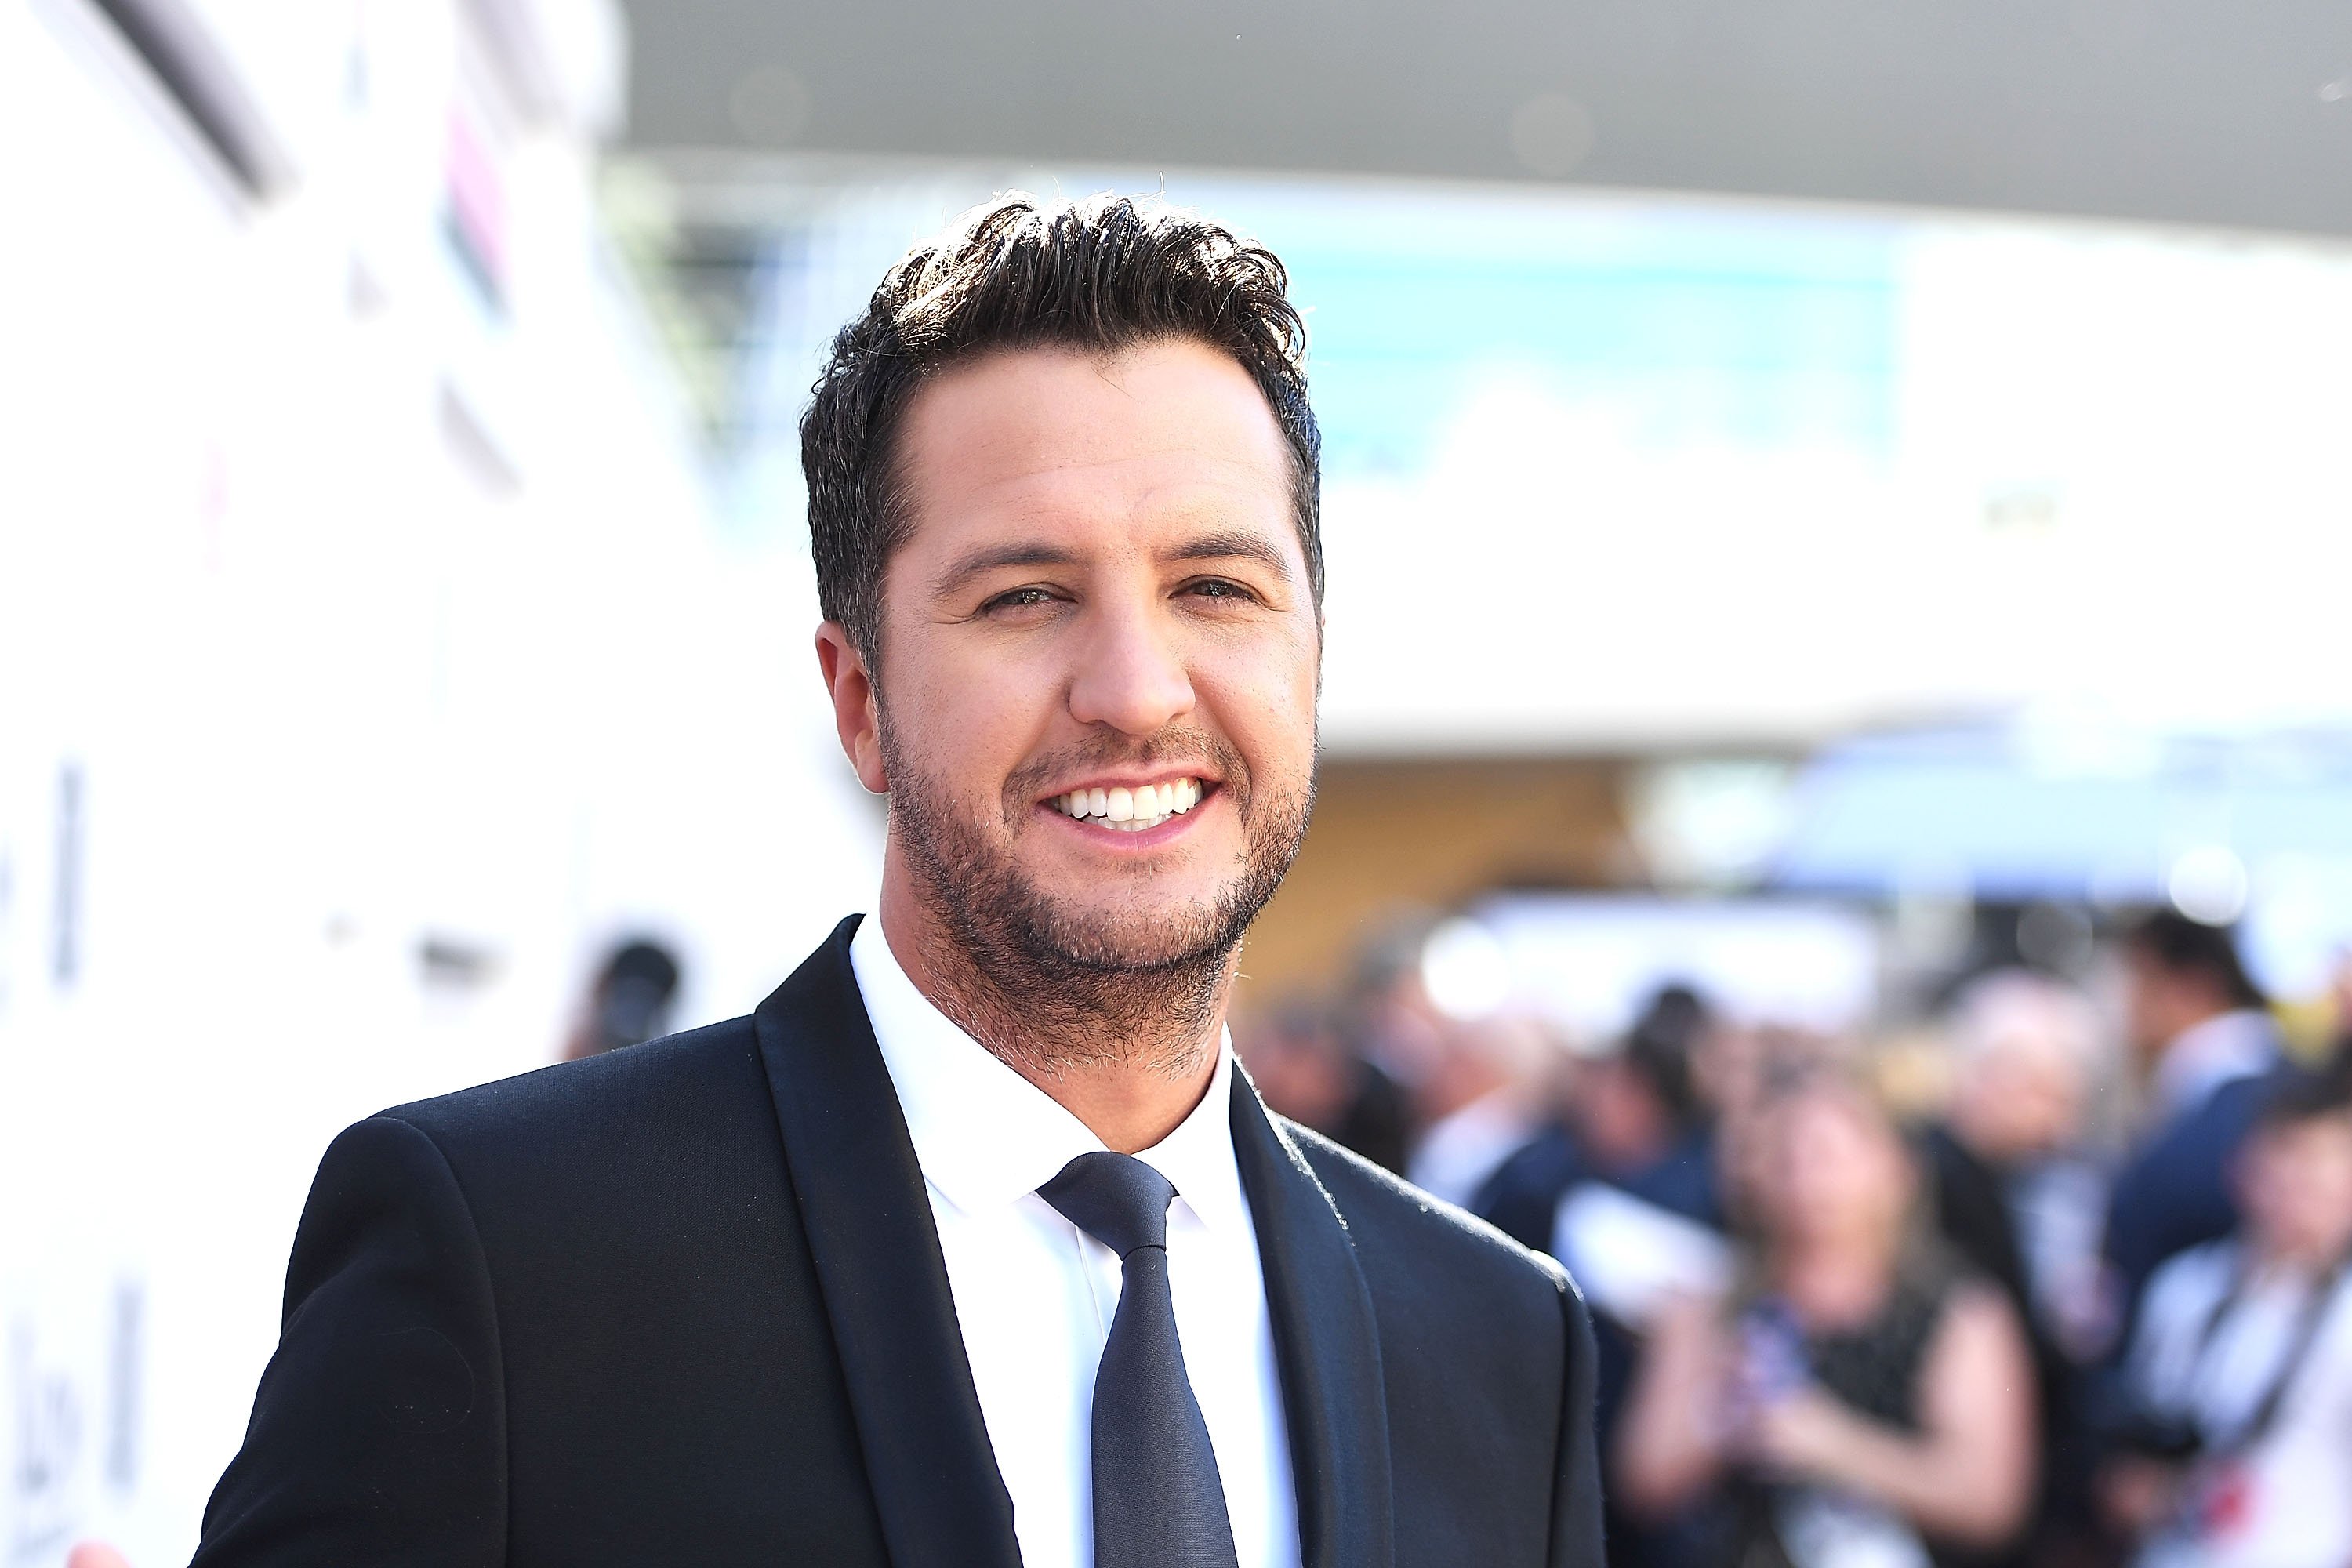 Luke Bryan attends the 52nd Academy Of Country Music Awards at T-Mobile Arena on April 2, 2017 in Las Vegas, Nevada | Photo: Getty Images